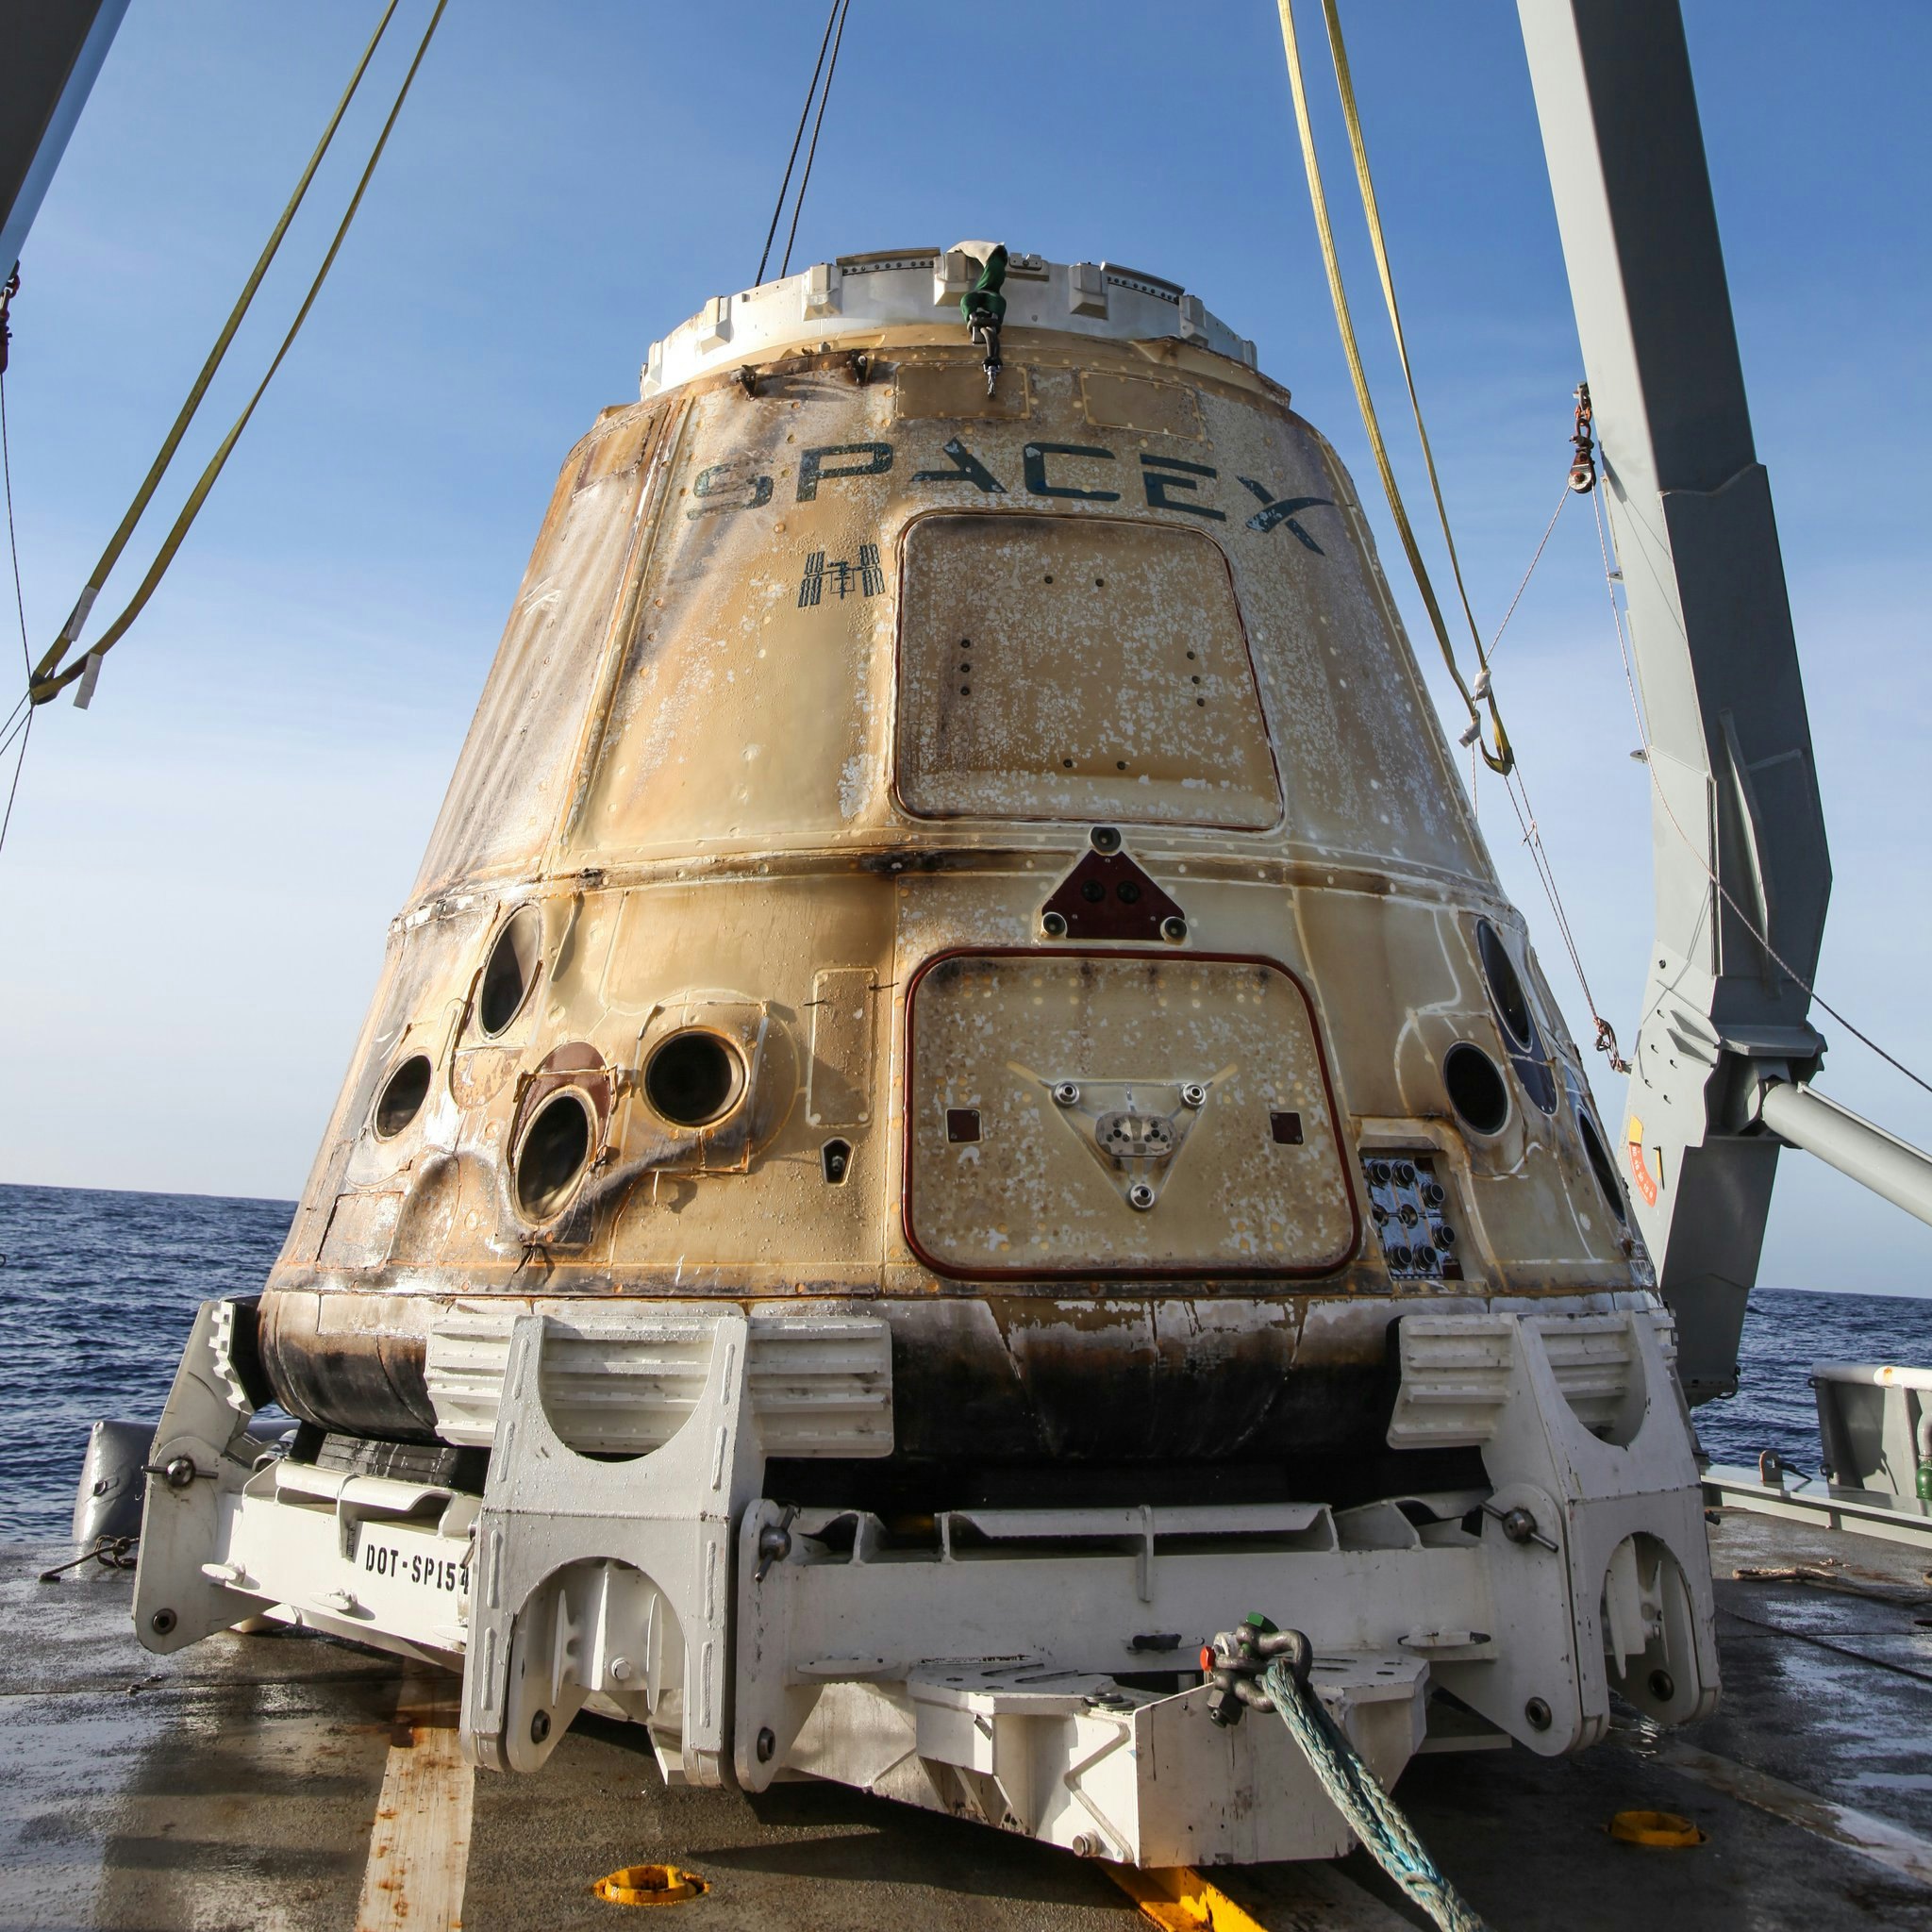 22+ Spacex Dragon Capsule Pictures